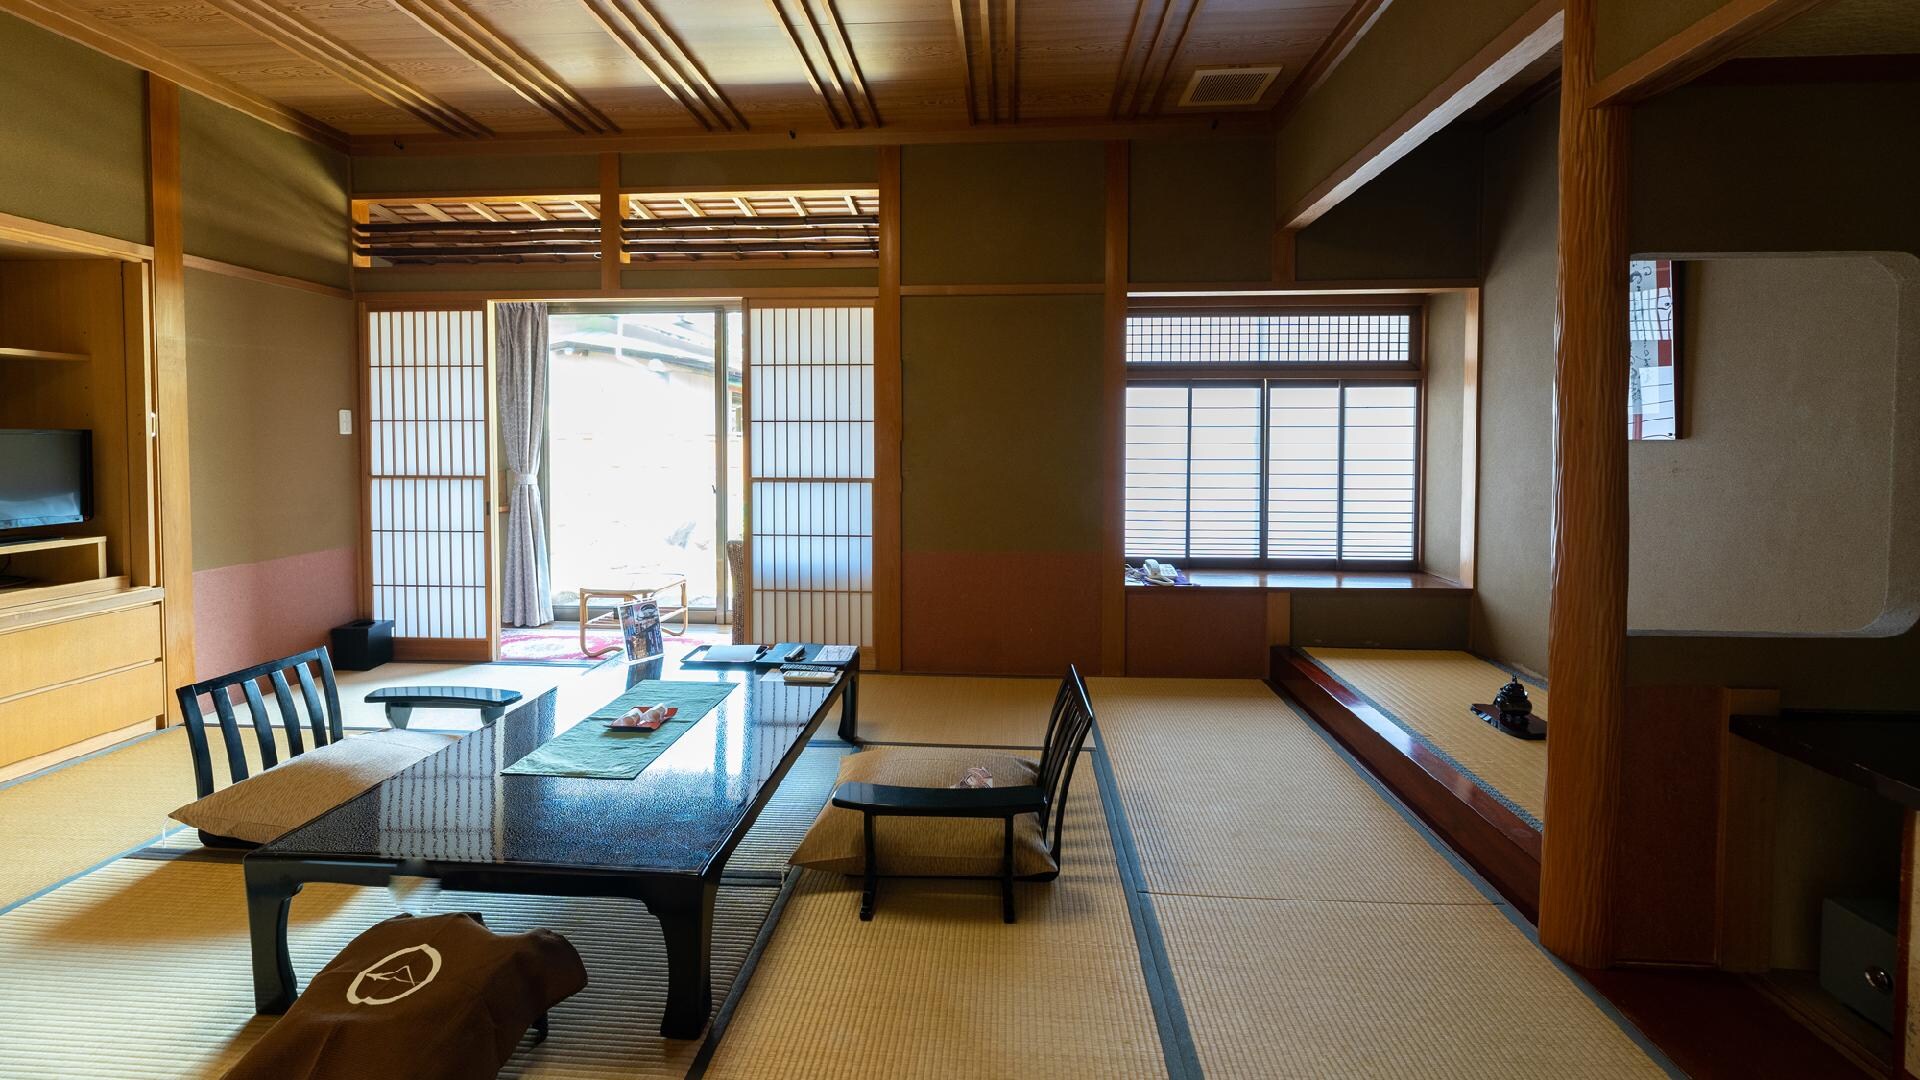 An example of a type with a Toyama living room